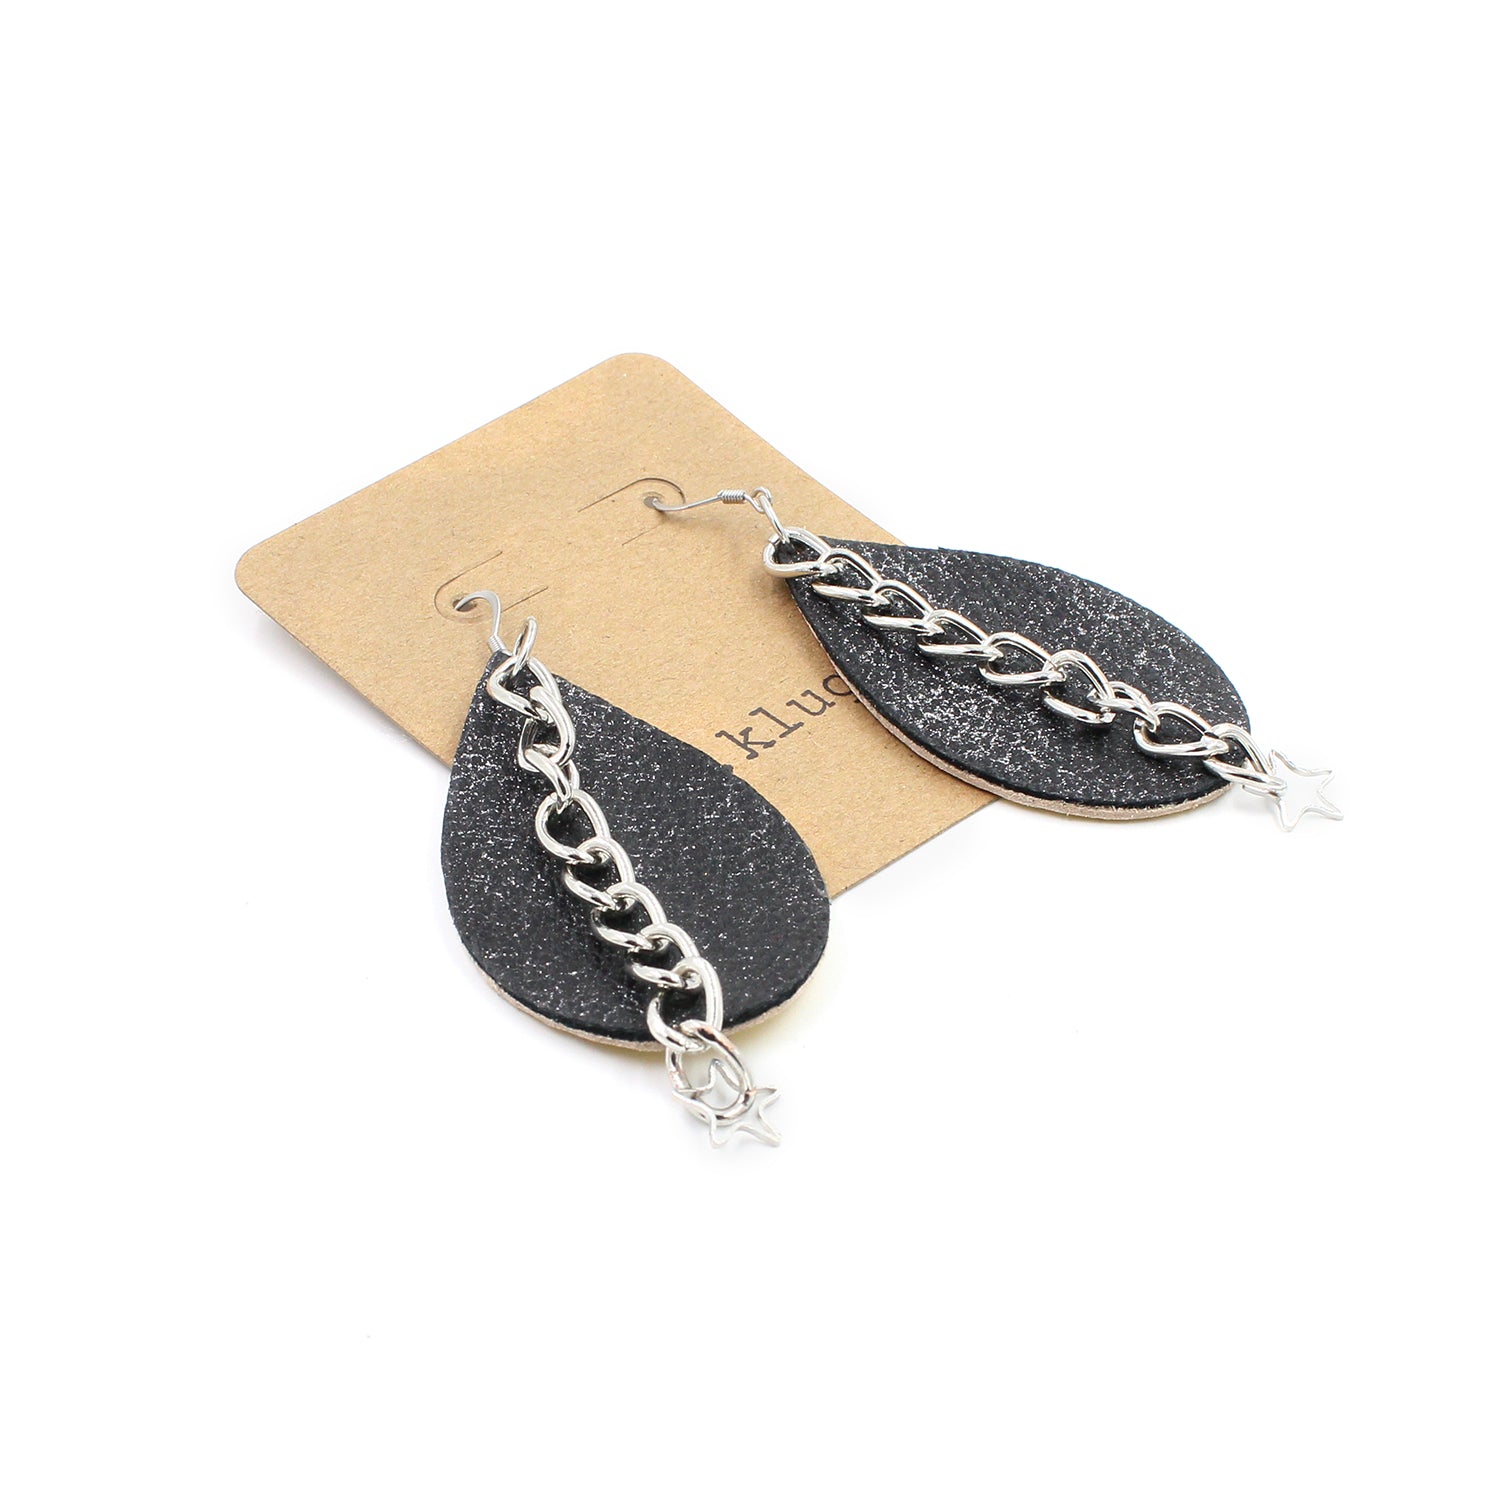 Sparkly Gunmetal Leather Drop Earrings with Chain & Stars